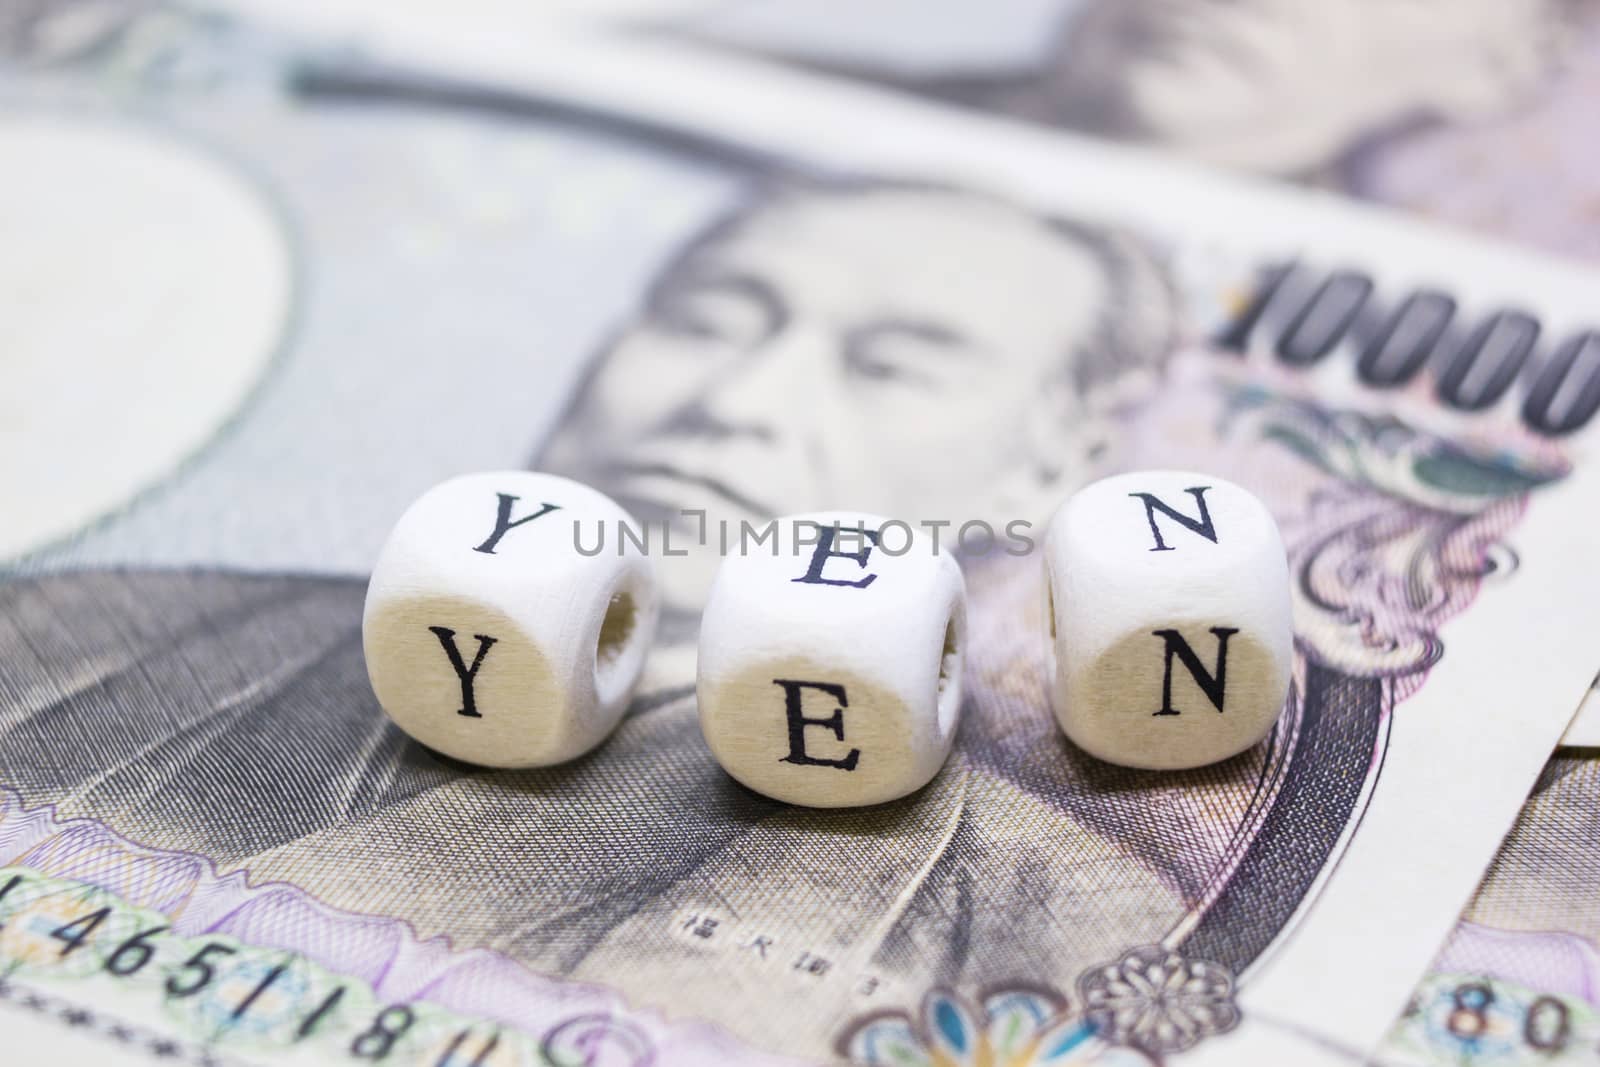 close-up of wooden cube with text "Y E N" on banknote YEN for business and financial concept.